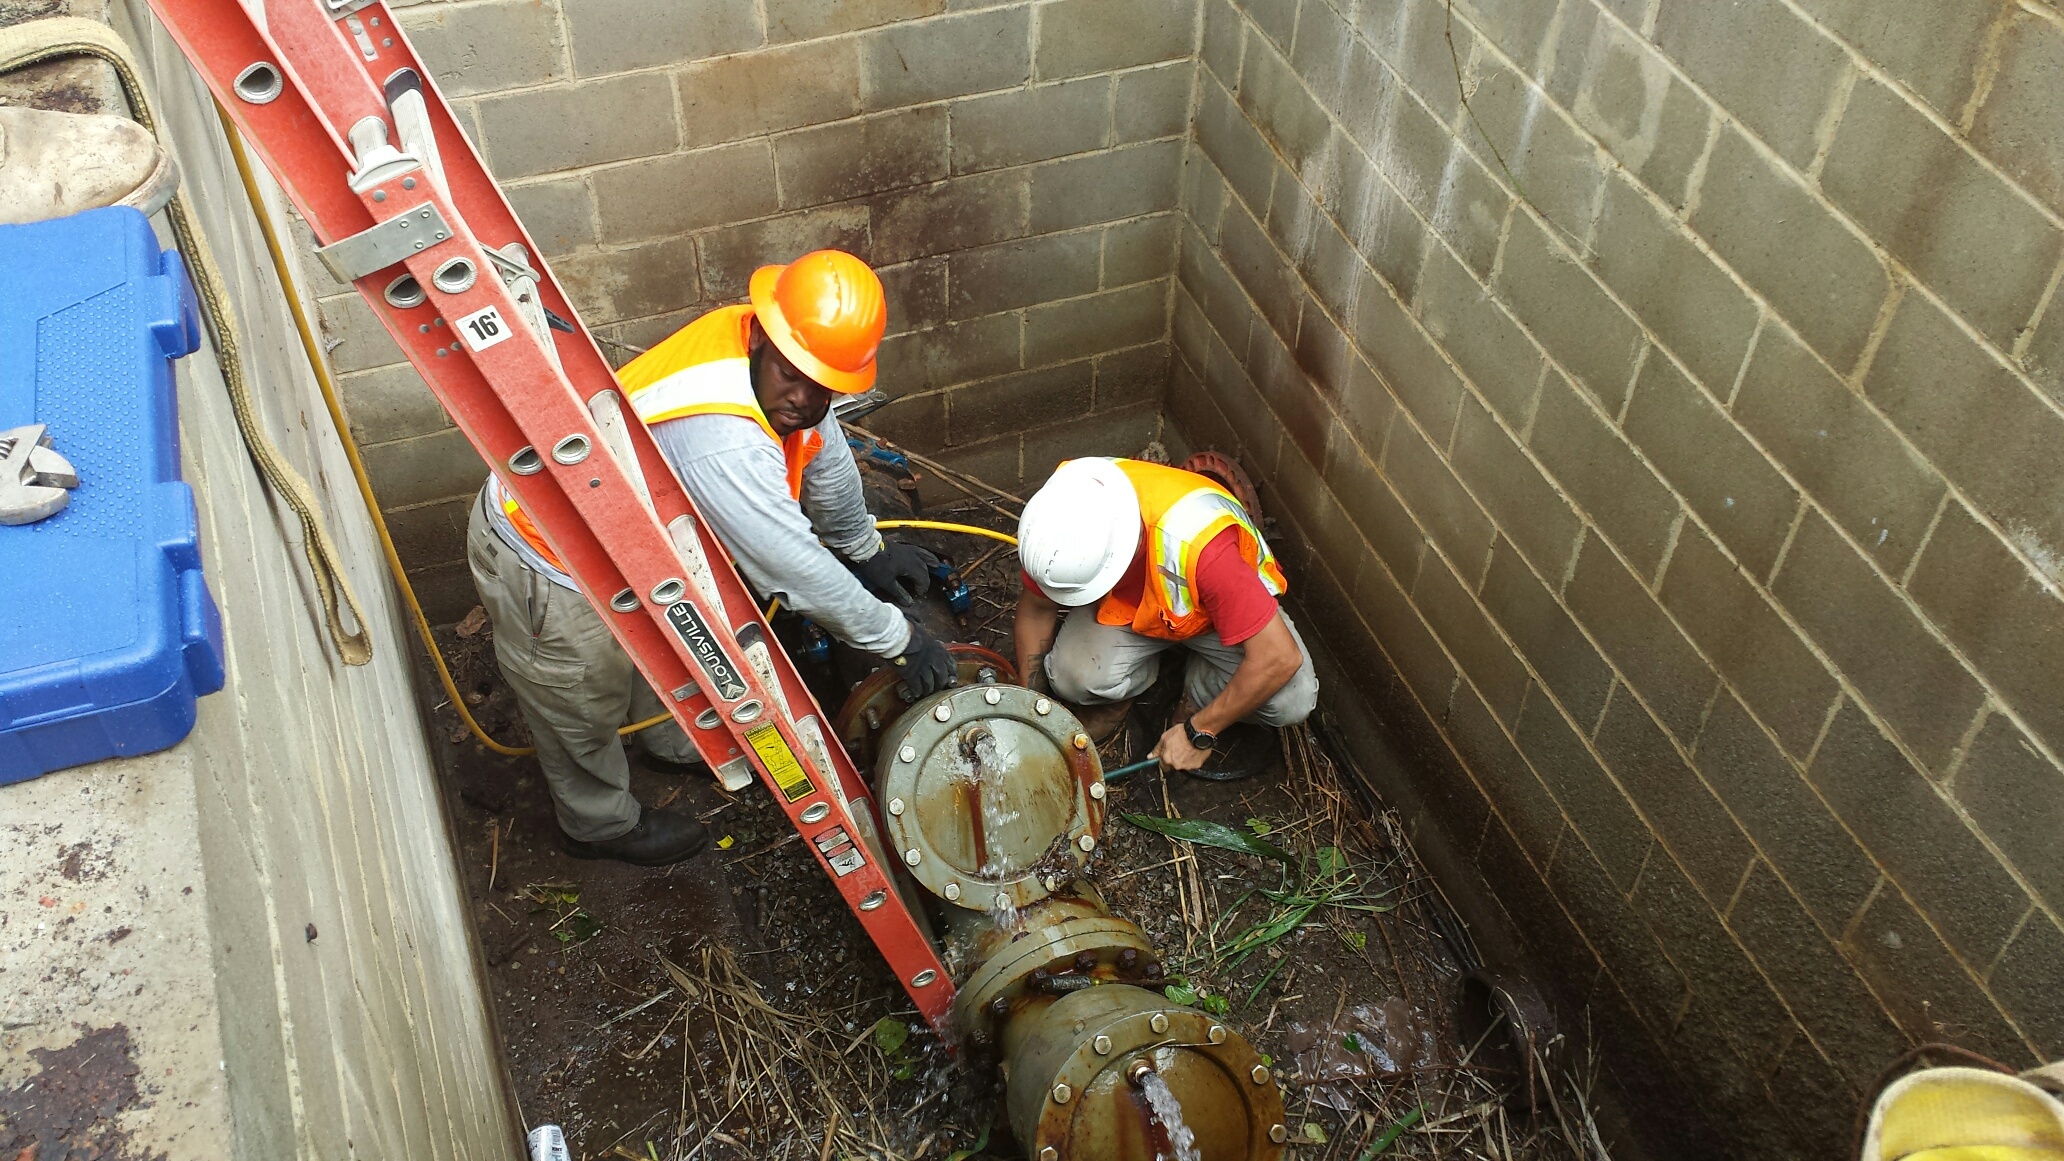 Cayce workers provide access to their water supply to stabilize Columbia's water system